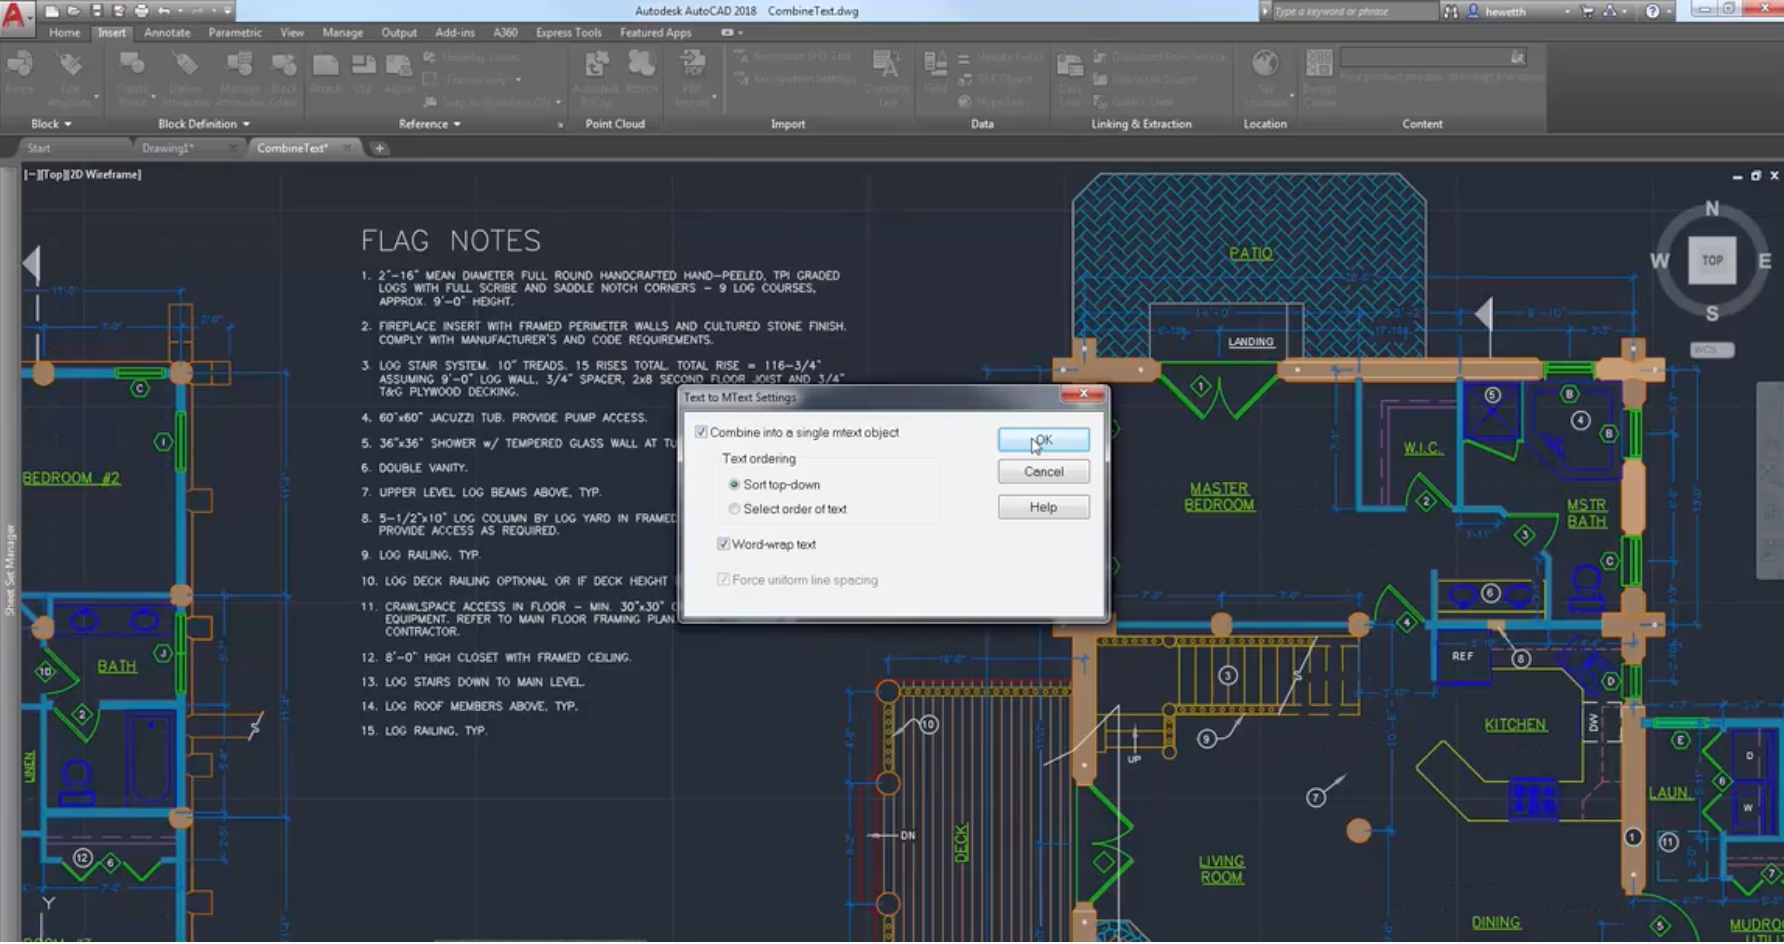 AutoCAD Software - Convert combinations of text and Mtext objects to a single Mtext object